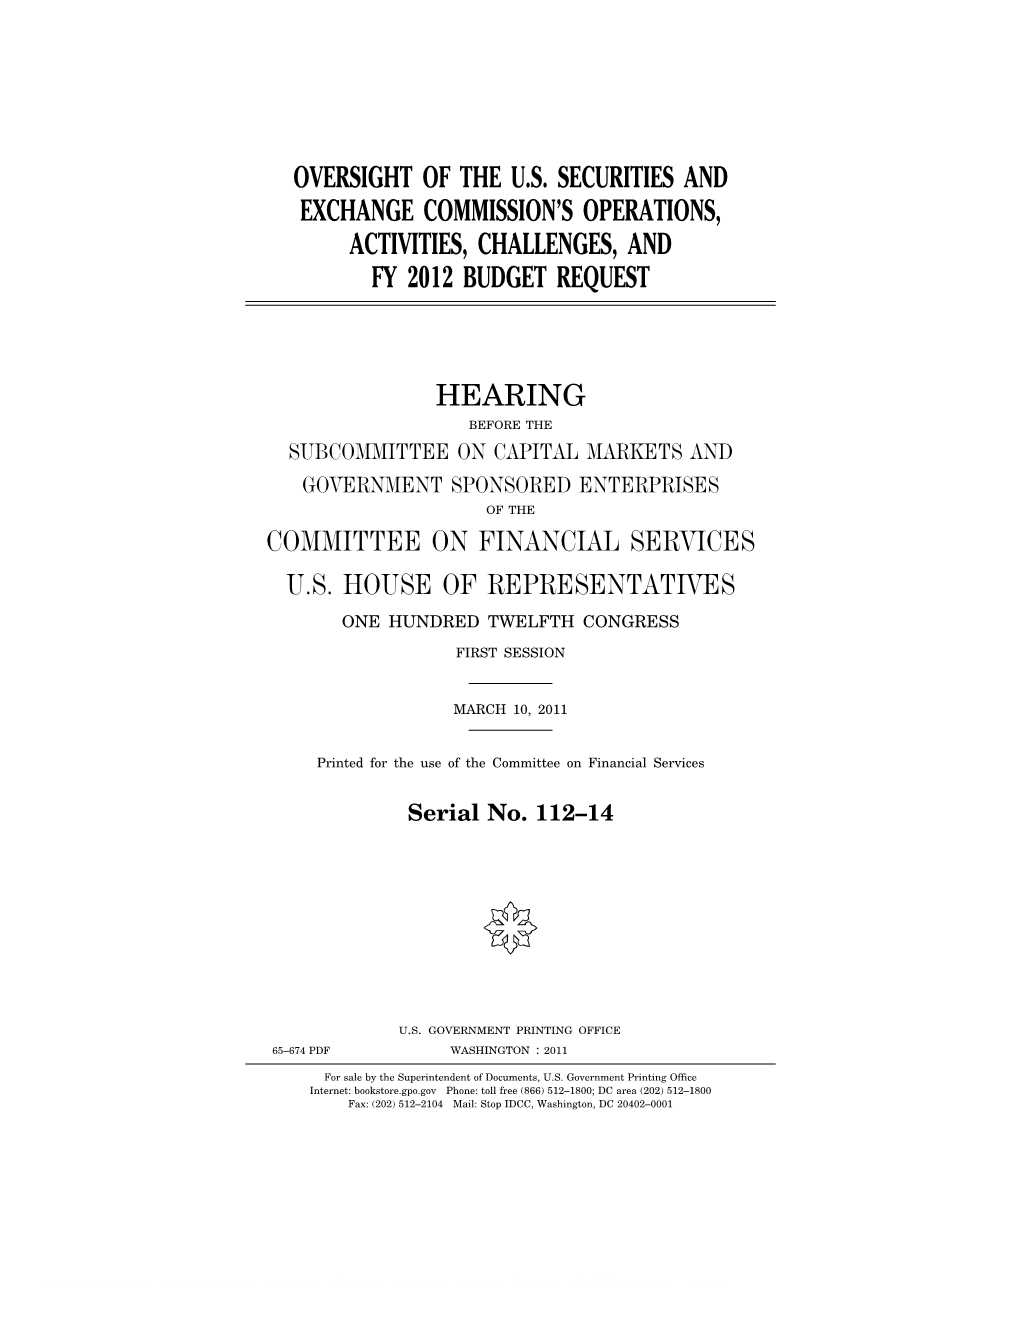 Oversight of the Us Securities and Exchange Commission's Operations